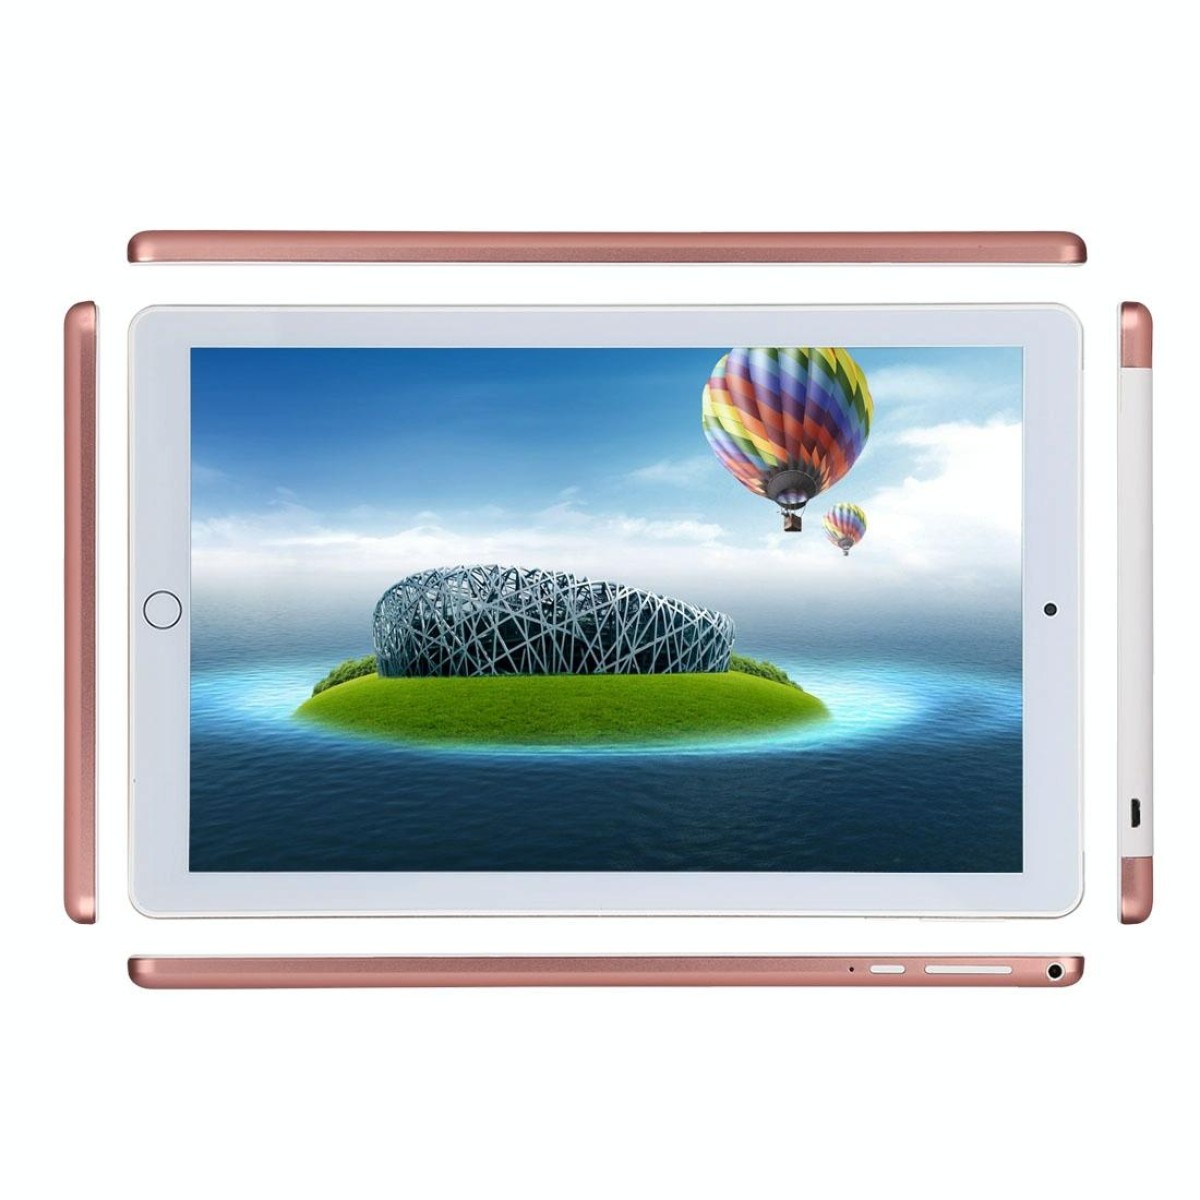 3G Phone Call Tablet PC, 10.1 inch, 2GB+32GB, Android 5.1 MTK6580 Quad Core 1.3GHz, Dual SIM, Support GPS, OTG, WiFi, Bluetooth(Rose Gold)